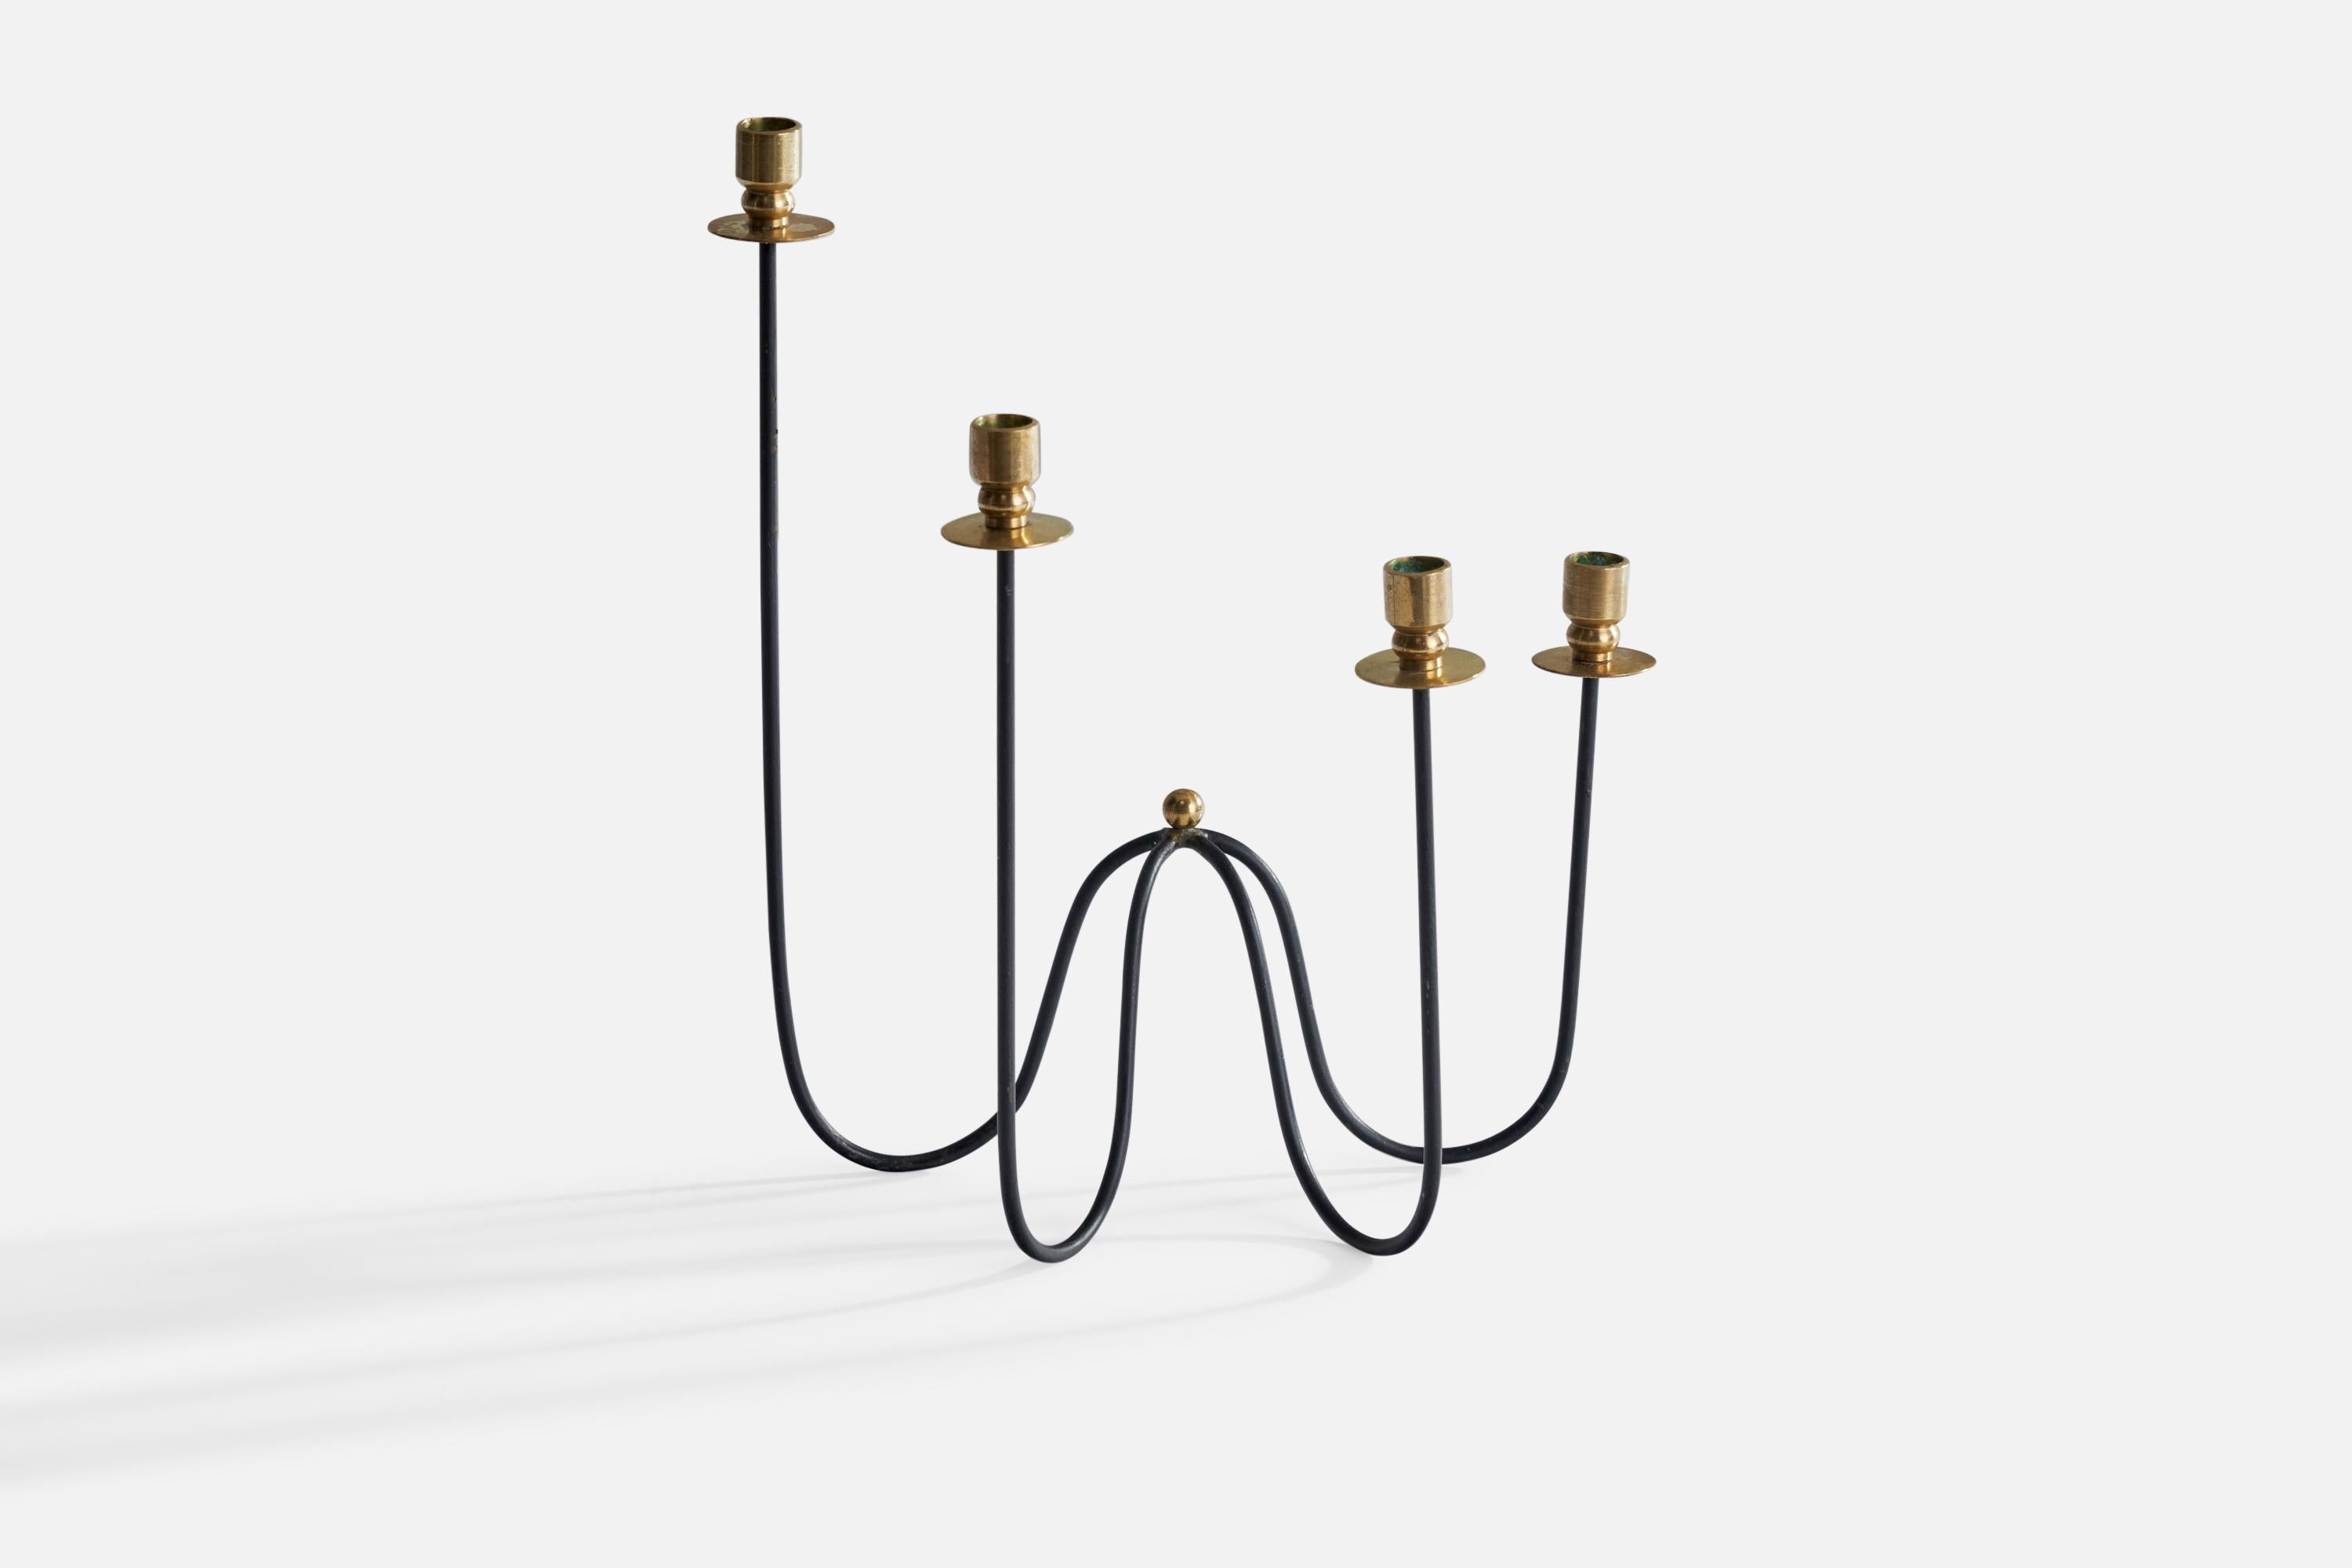 A small brass and black-painted metal candelabra designed and produced in Sweden, 1940s.

Holds .4” diameter candles.